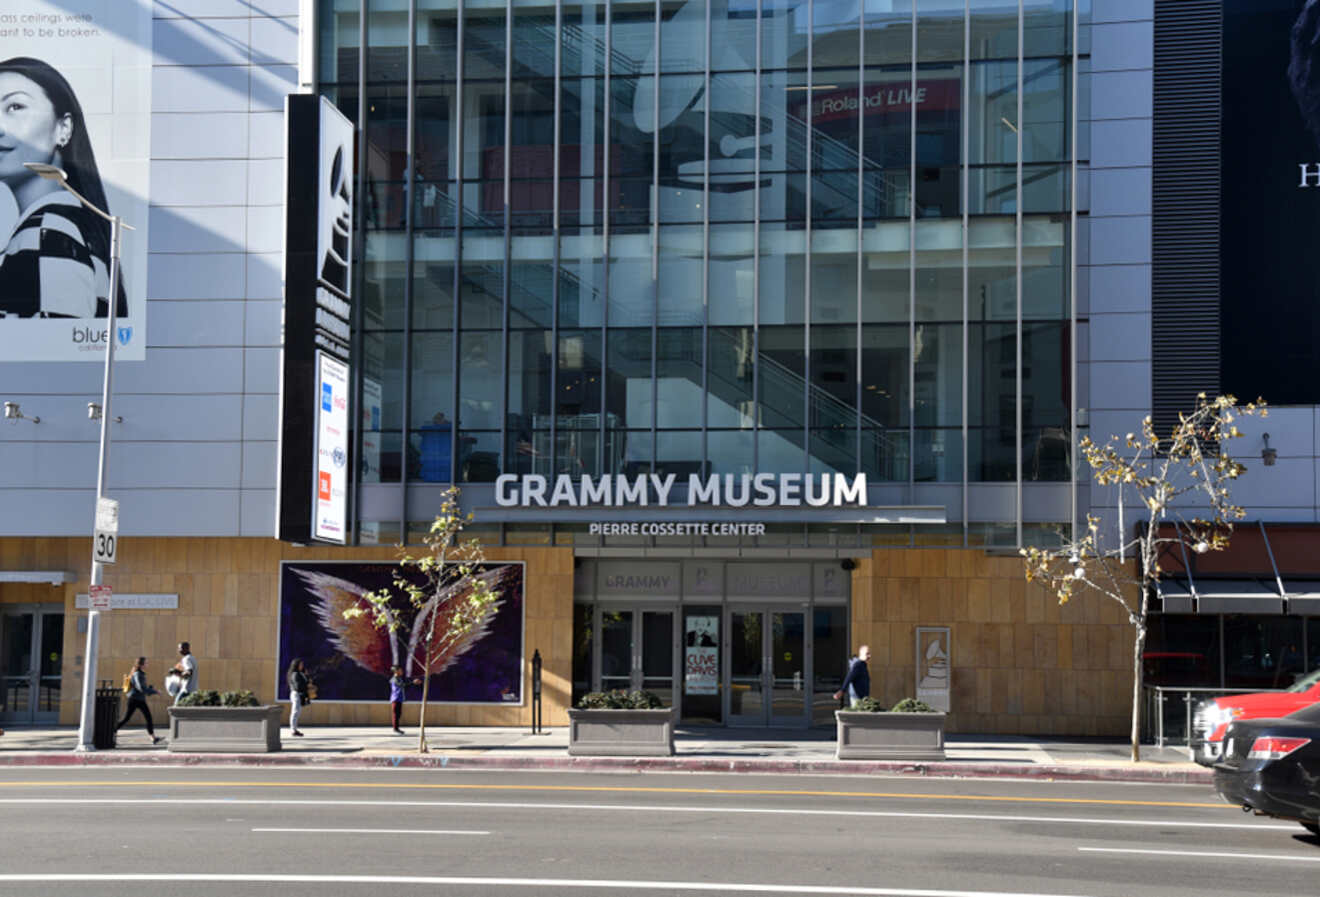 View of the entrance of GRAMMY museum